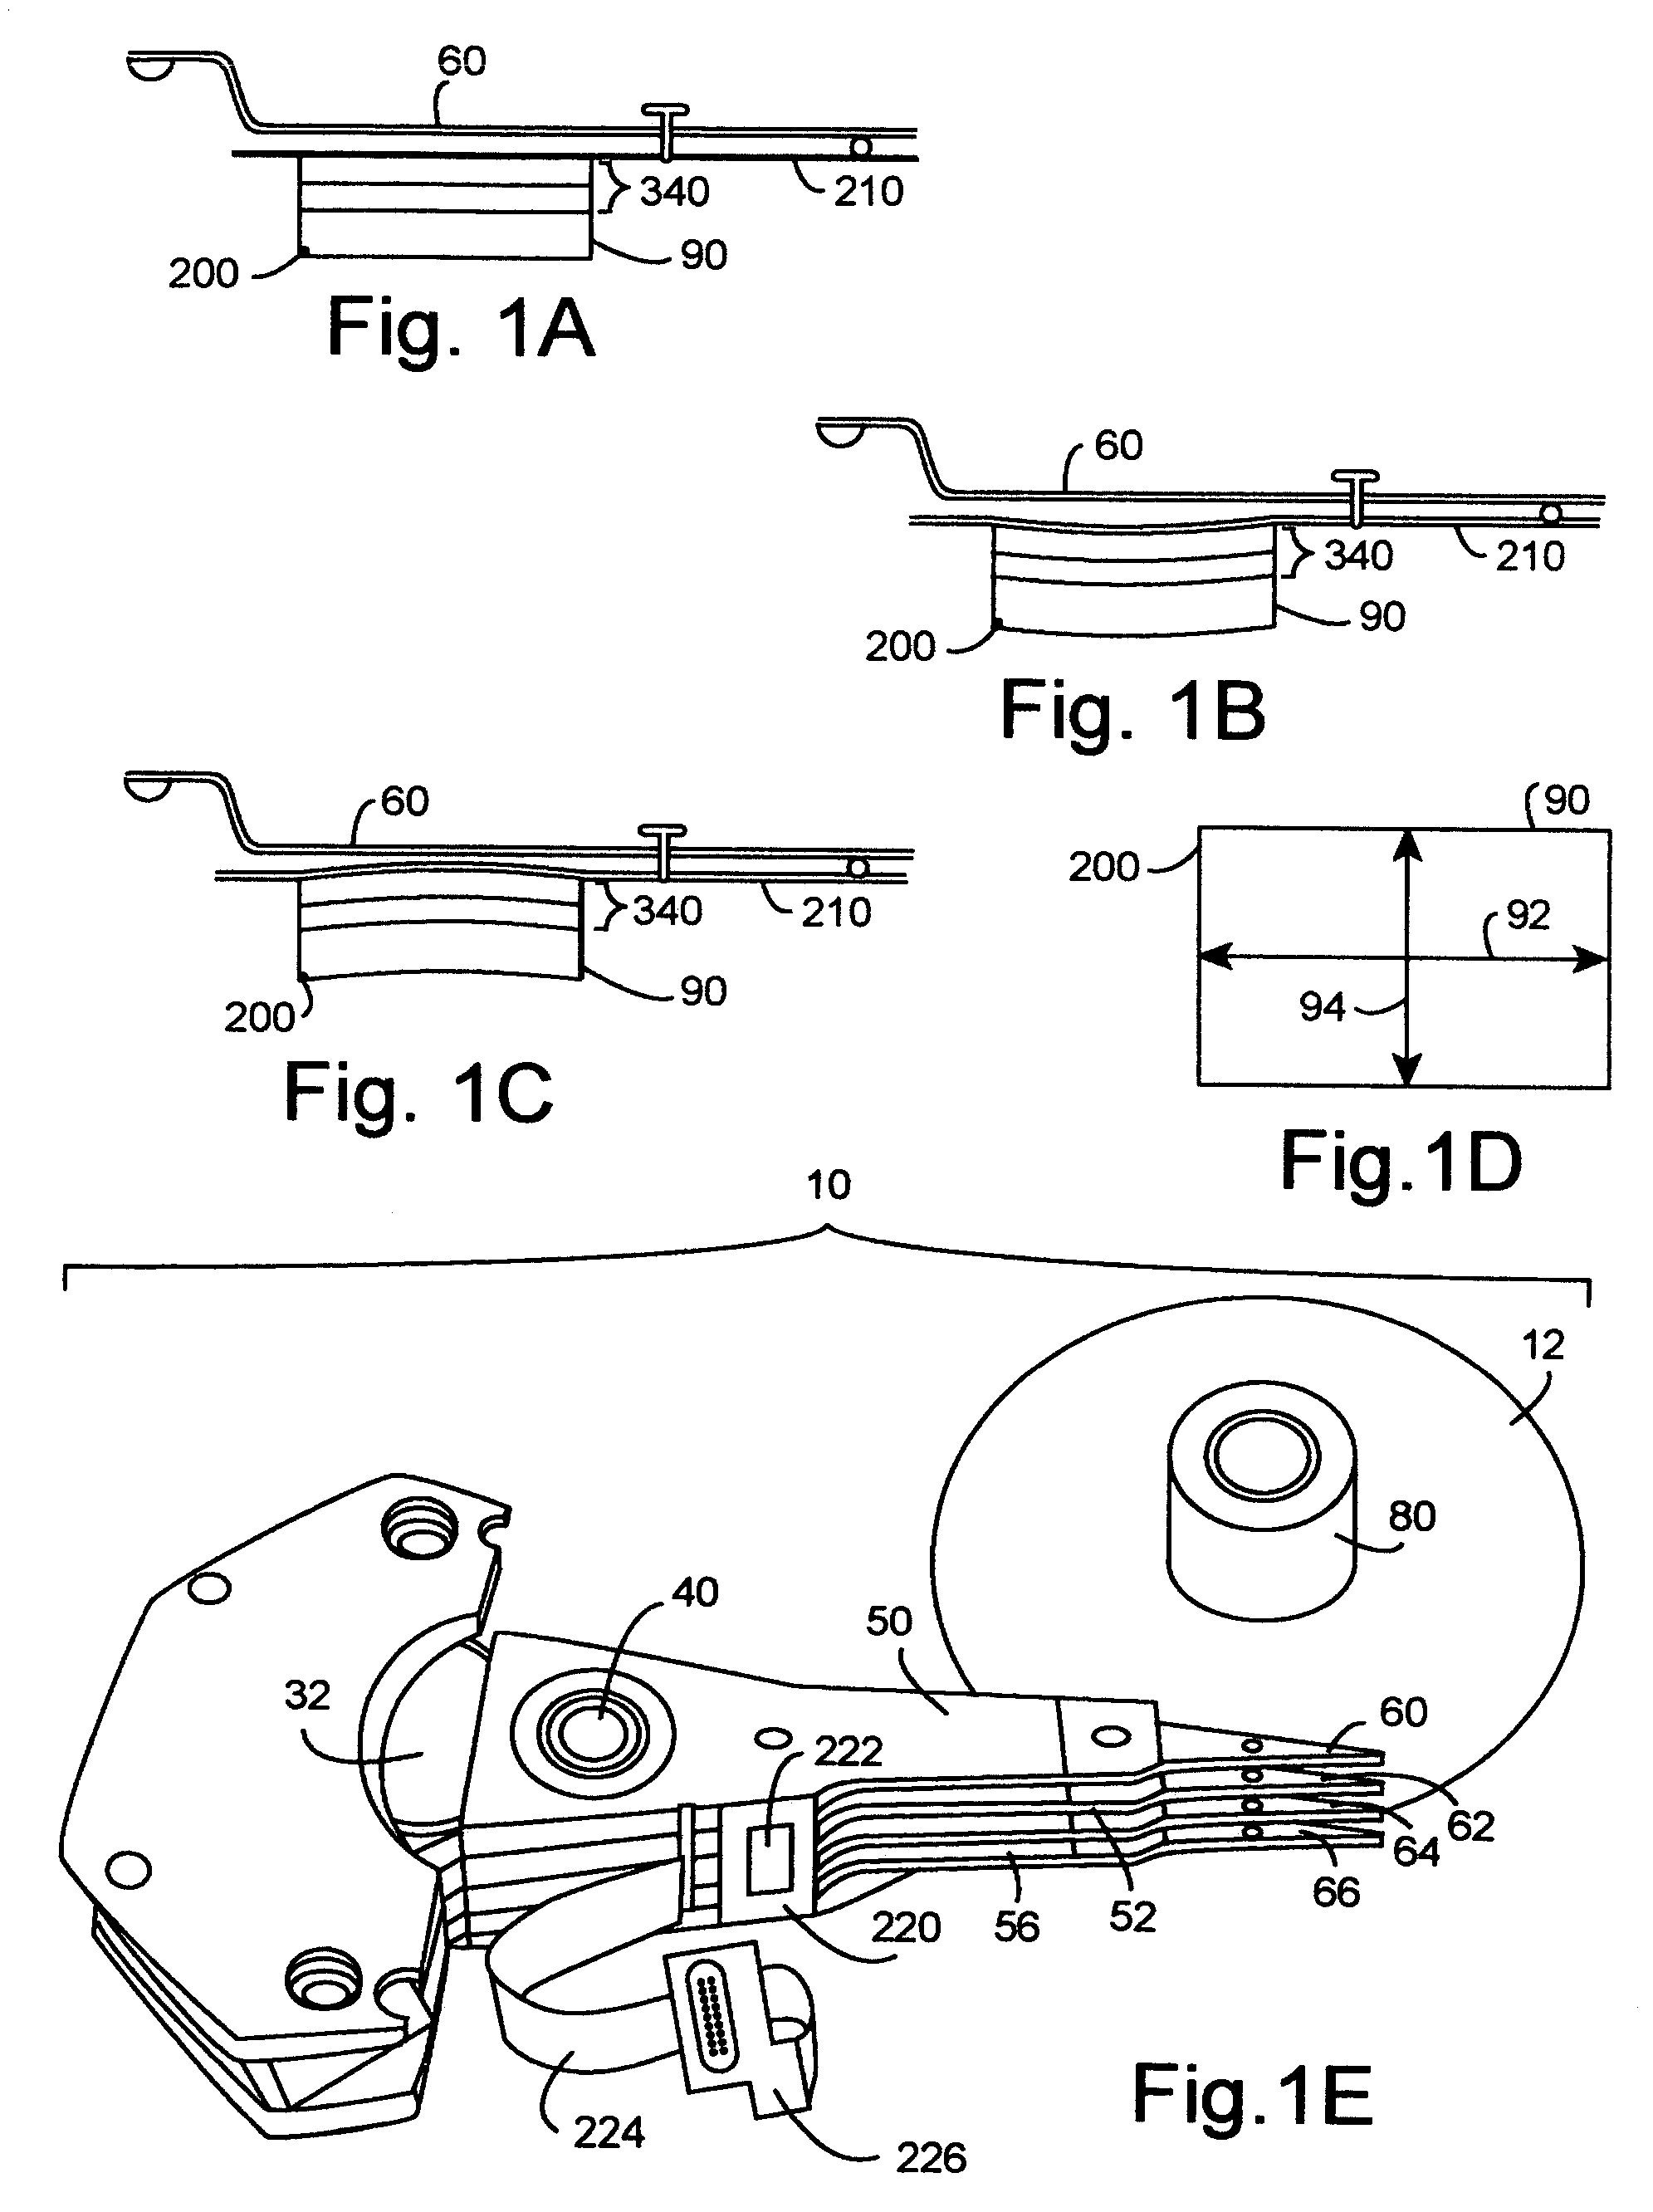 Head gimbal assemblies for very low flying height heads with optional micro-actuators in a hard disk drive